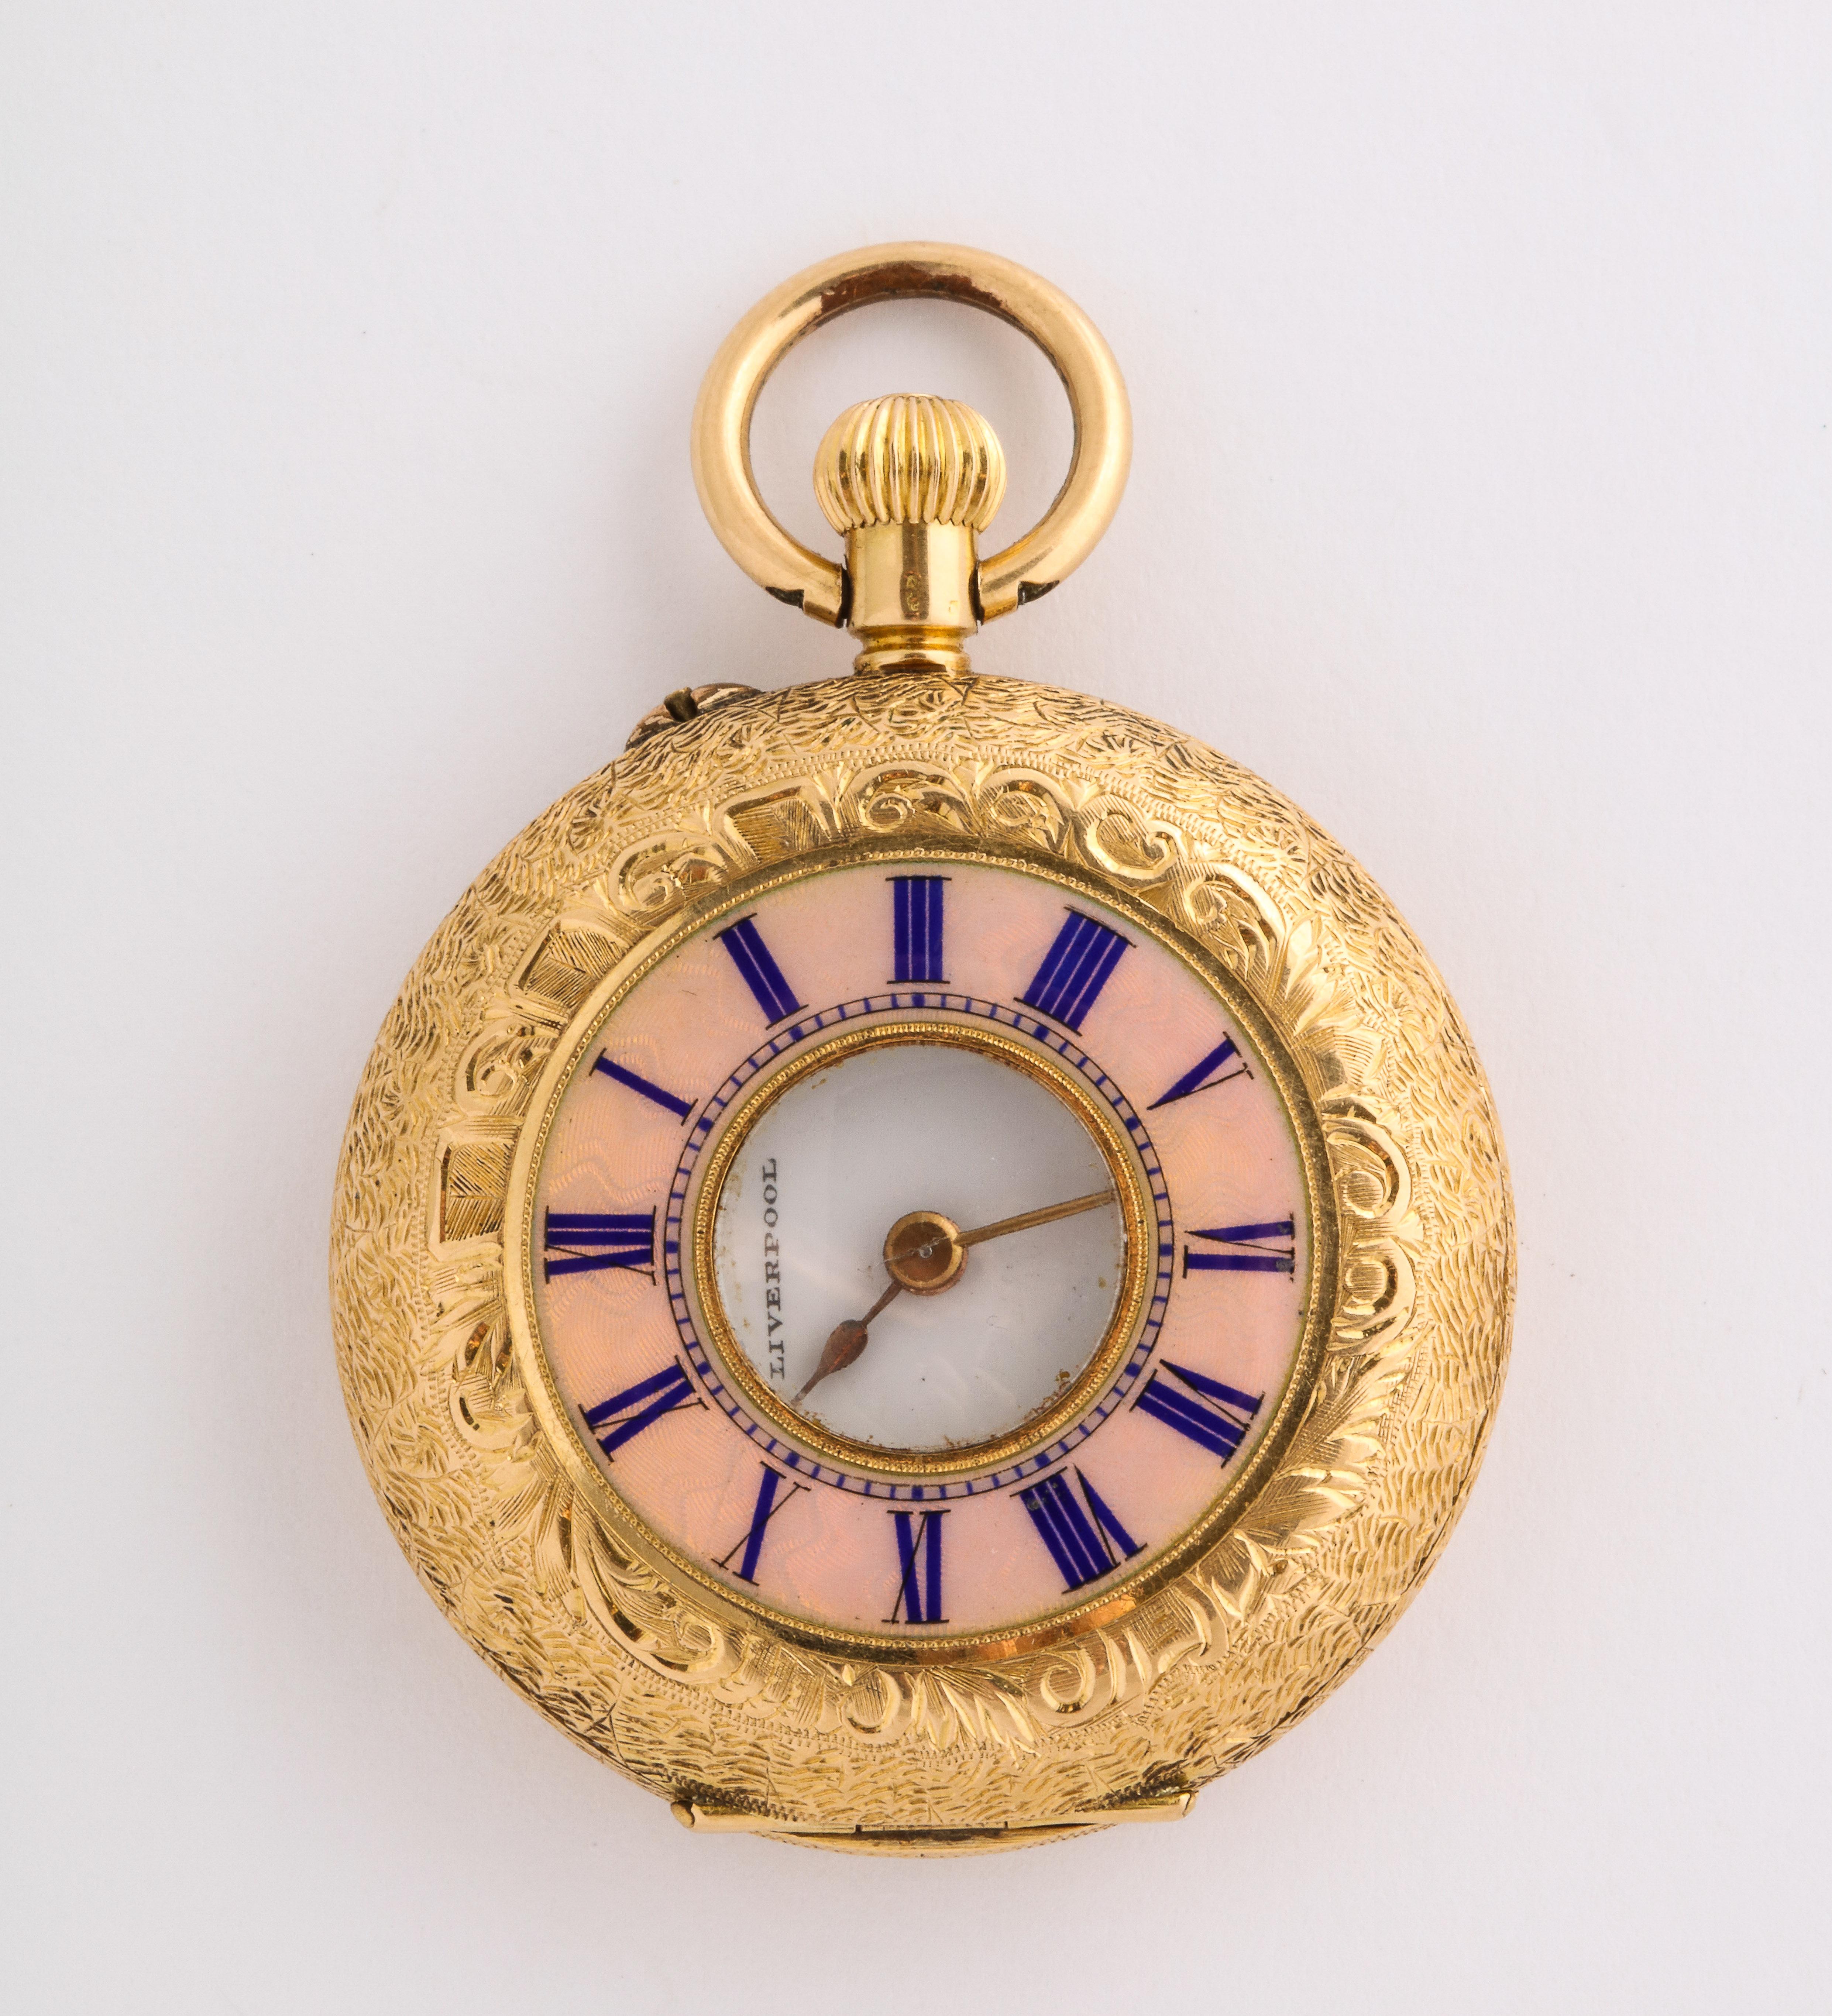 Beautiful 18k gold guilloché enameled half hunter fully engraved case, pocket watch. An elegant timepiece, the roman chapters in dark blue enamel against a salmon pink guilloché enamel ring, the case has a window in the middle, allowing the user to